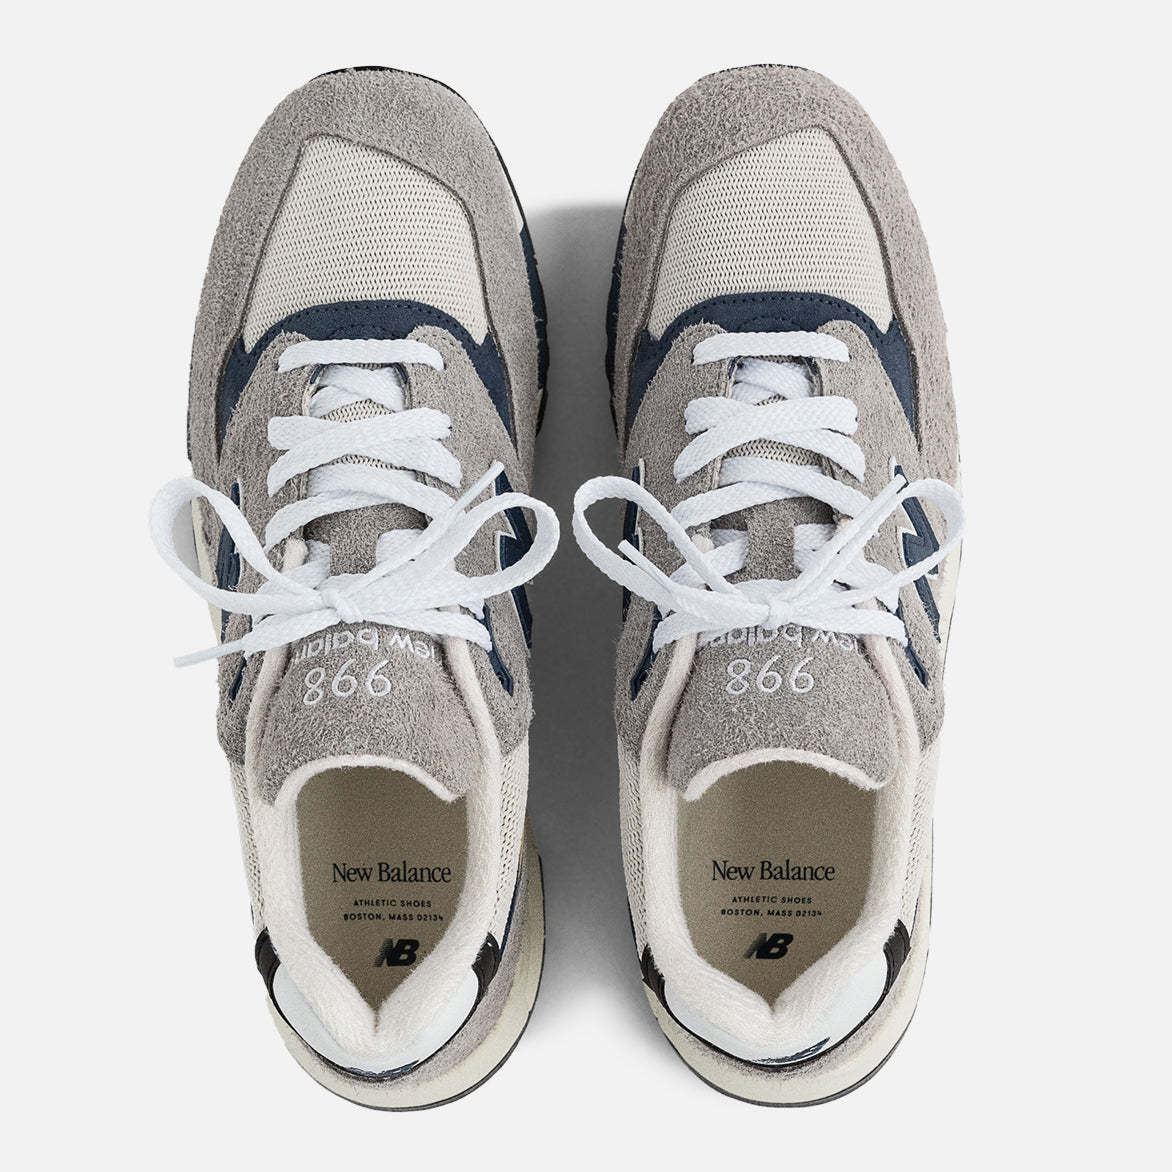 MADE IN USA 998 "GREY DAY"